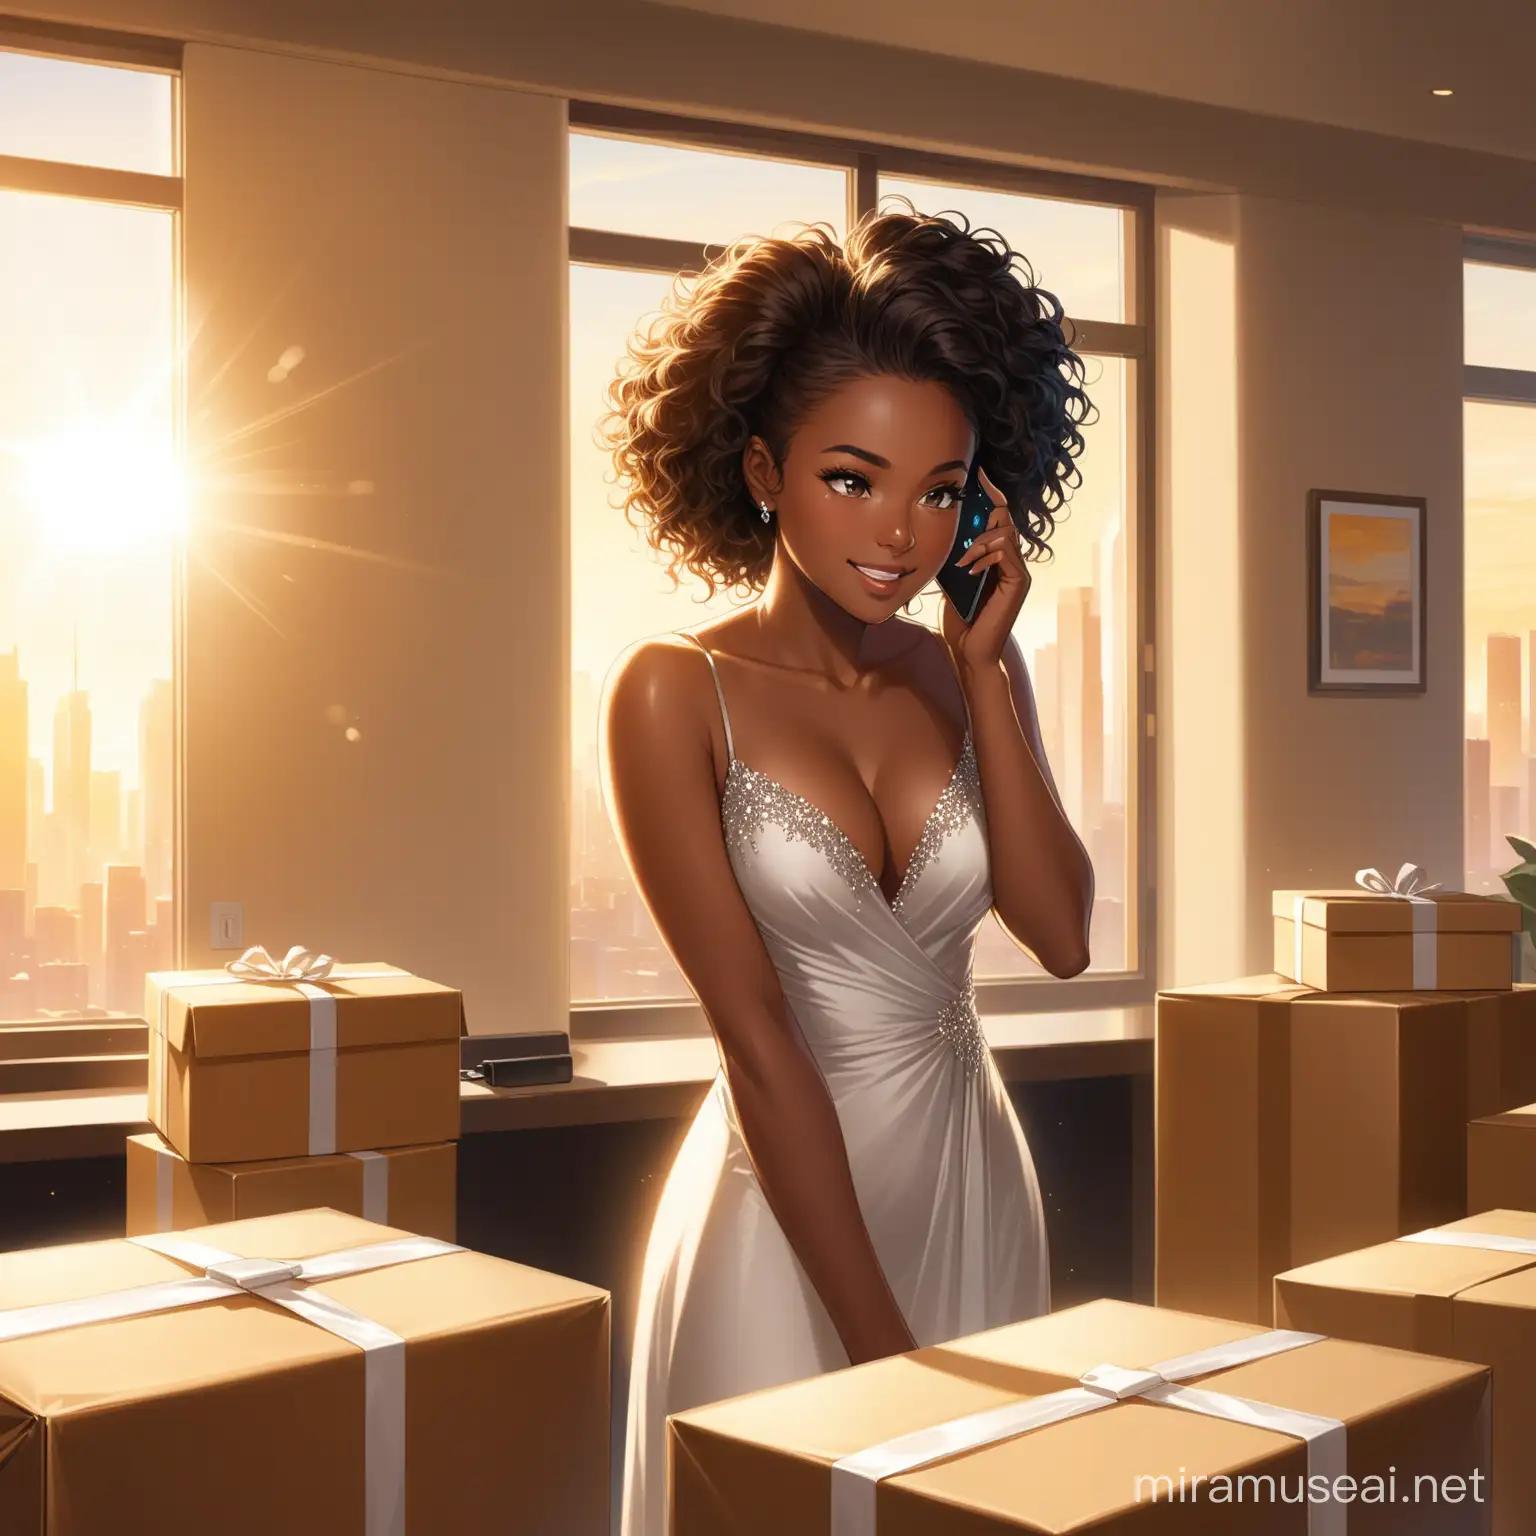 Elegant Black Woman Packing Gifts in Luxurious Suite